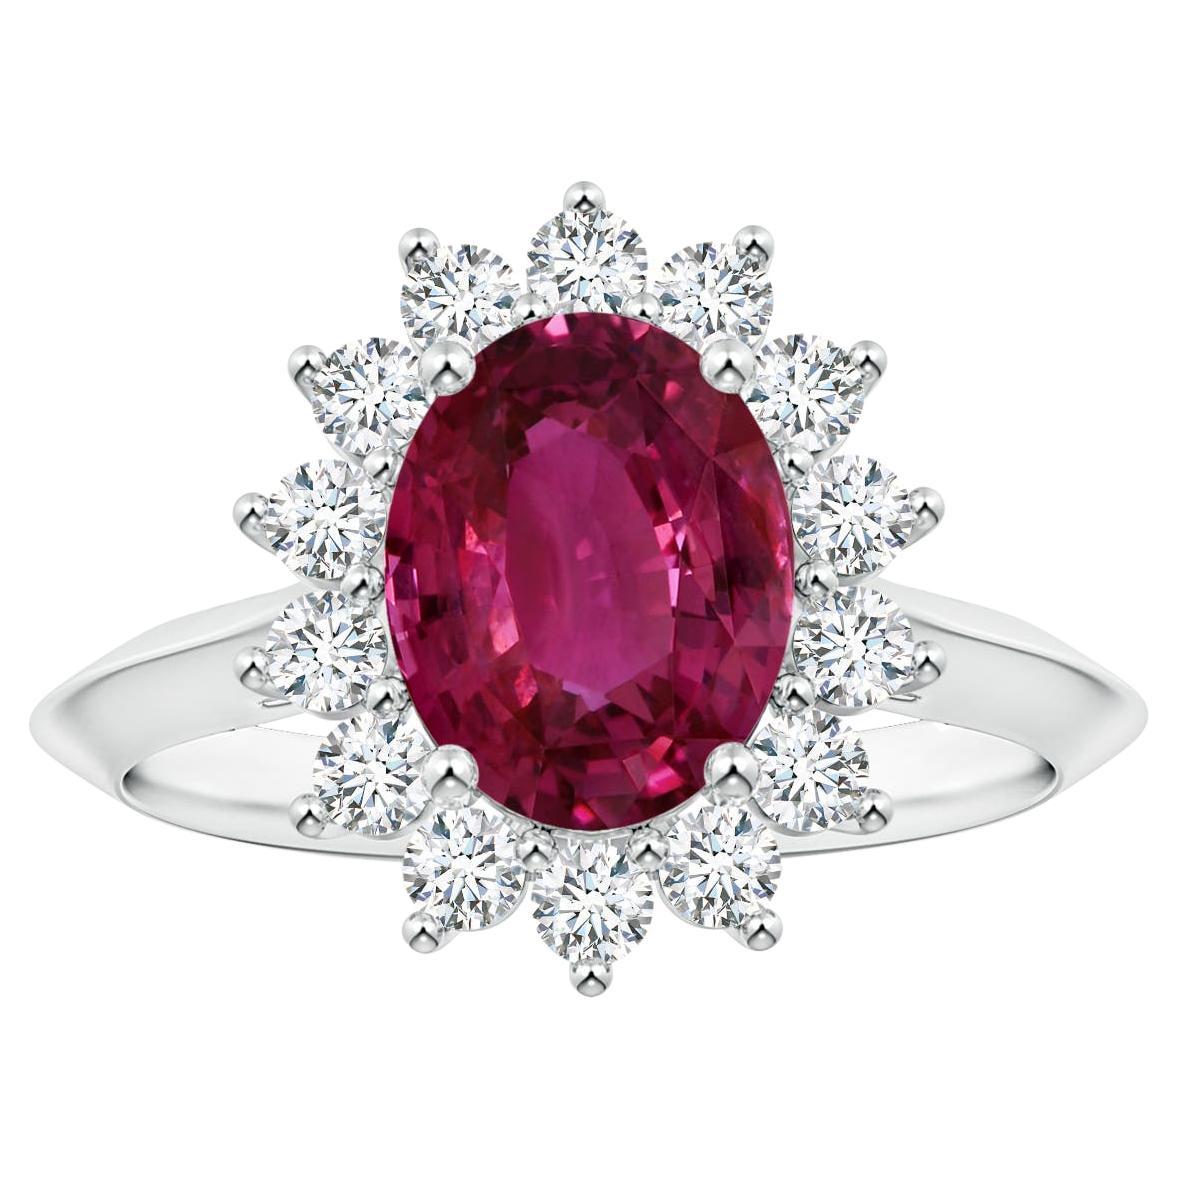 For Sale:  ANGARA Princess Diana Inspired GIA Certified Pink Sapphire Ring in White Gold